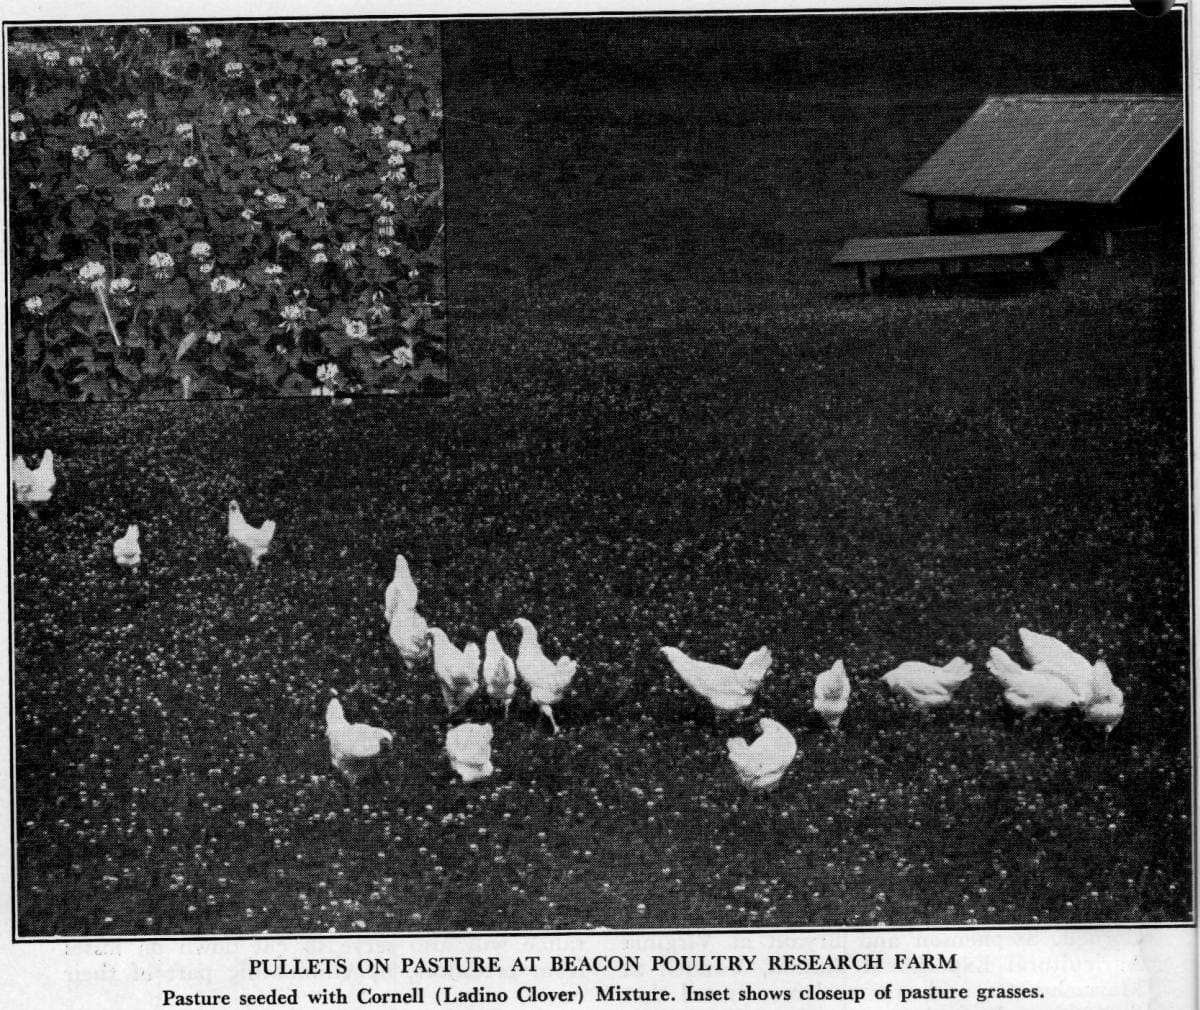 Pasture raised chickens on a clover field in New York. Home delivery of pasture raised chicken in New York City may be a recent adaptation, but Wrong Direction Farm's pasture raised chicken is part of a much older local New York tradition.